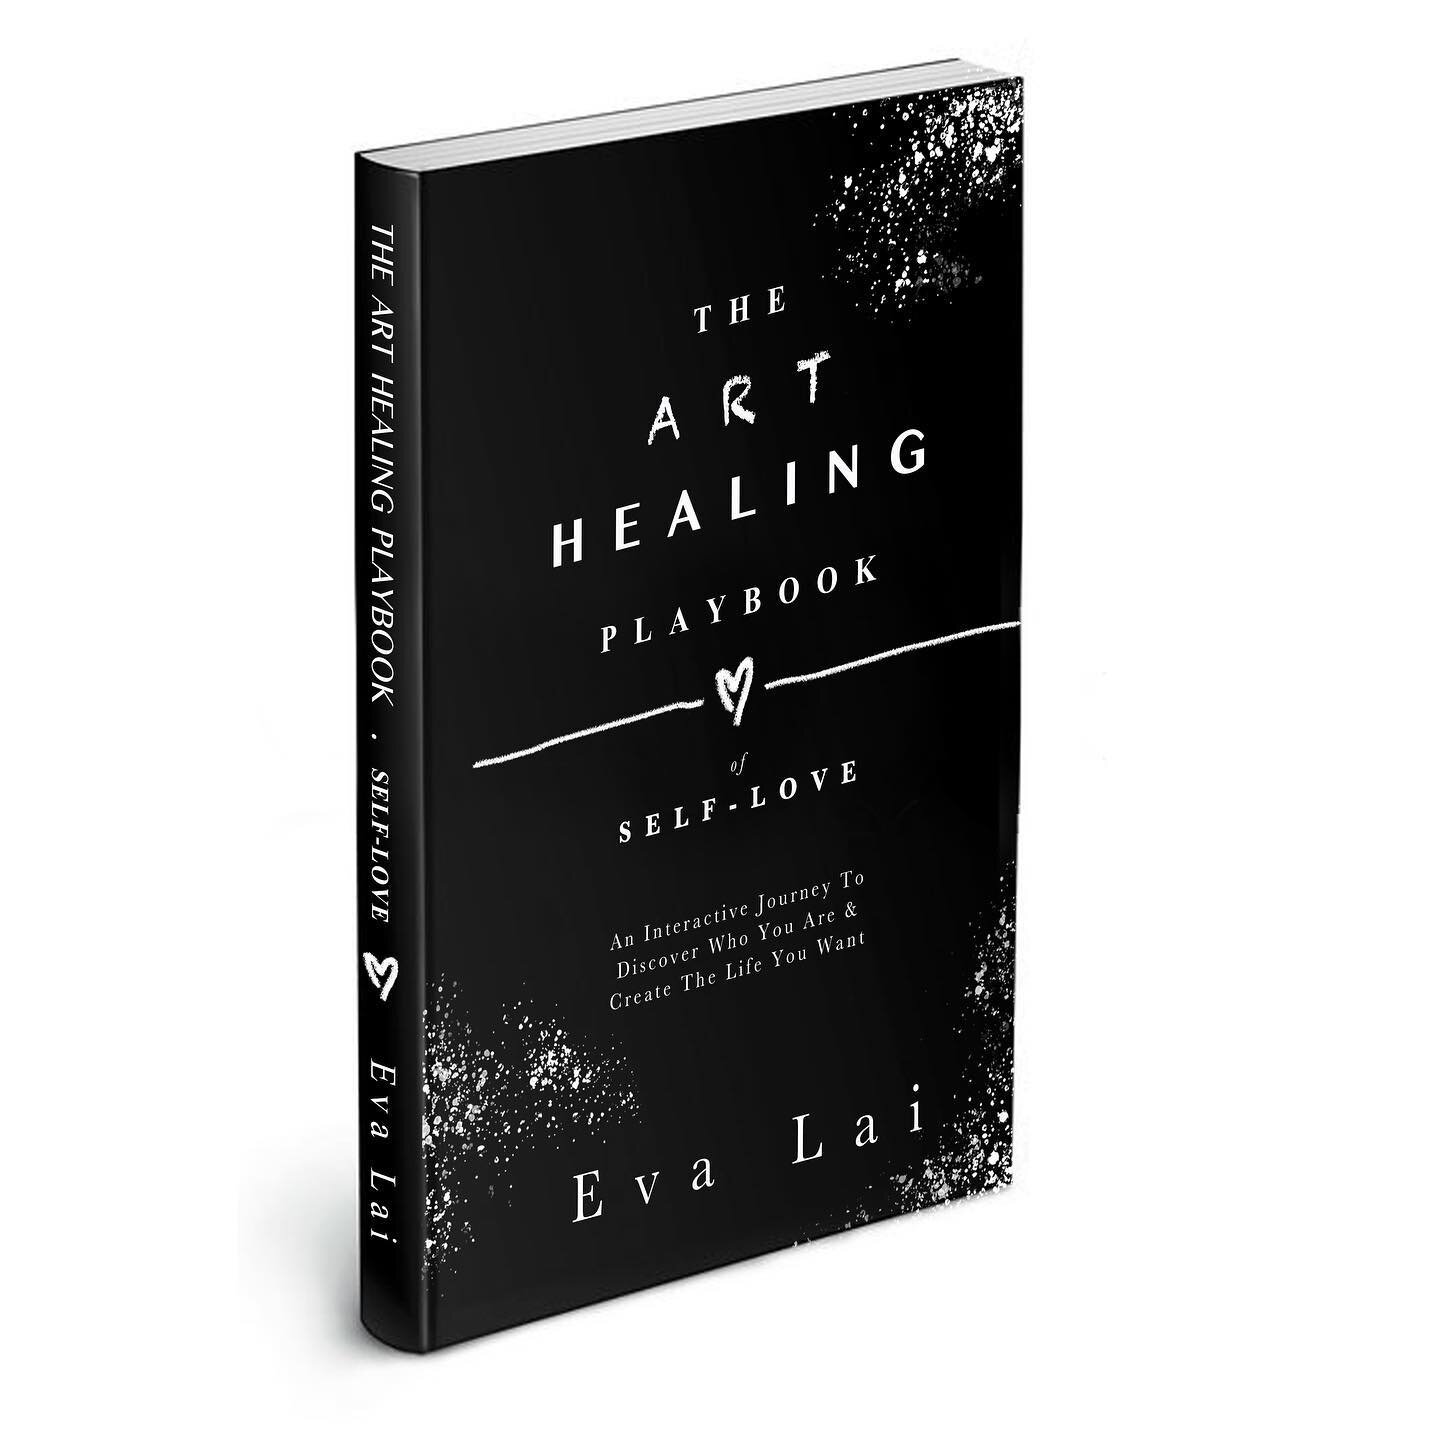 Ahhh 🎉😭💕 The Art Healing Playbook is NOW AVAILABLE on my Website for Pre- order!! 📚(aiming to get to you in Aug) 👉🏽Scroll to see what&rsquo;s inside. ✨Link in Bio
.
I&rsquo;m so excited and nervous at the same time!! It&rsquo;s seriously my fav